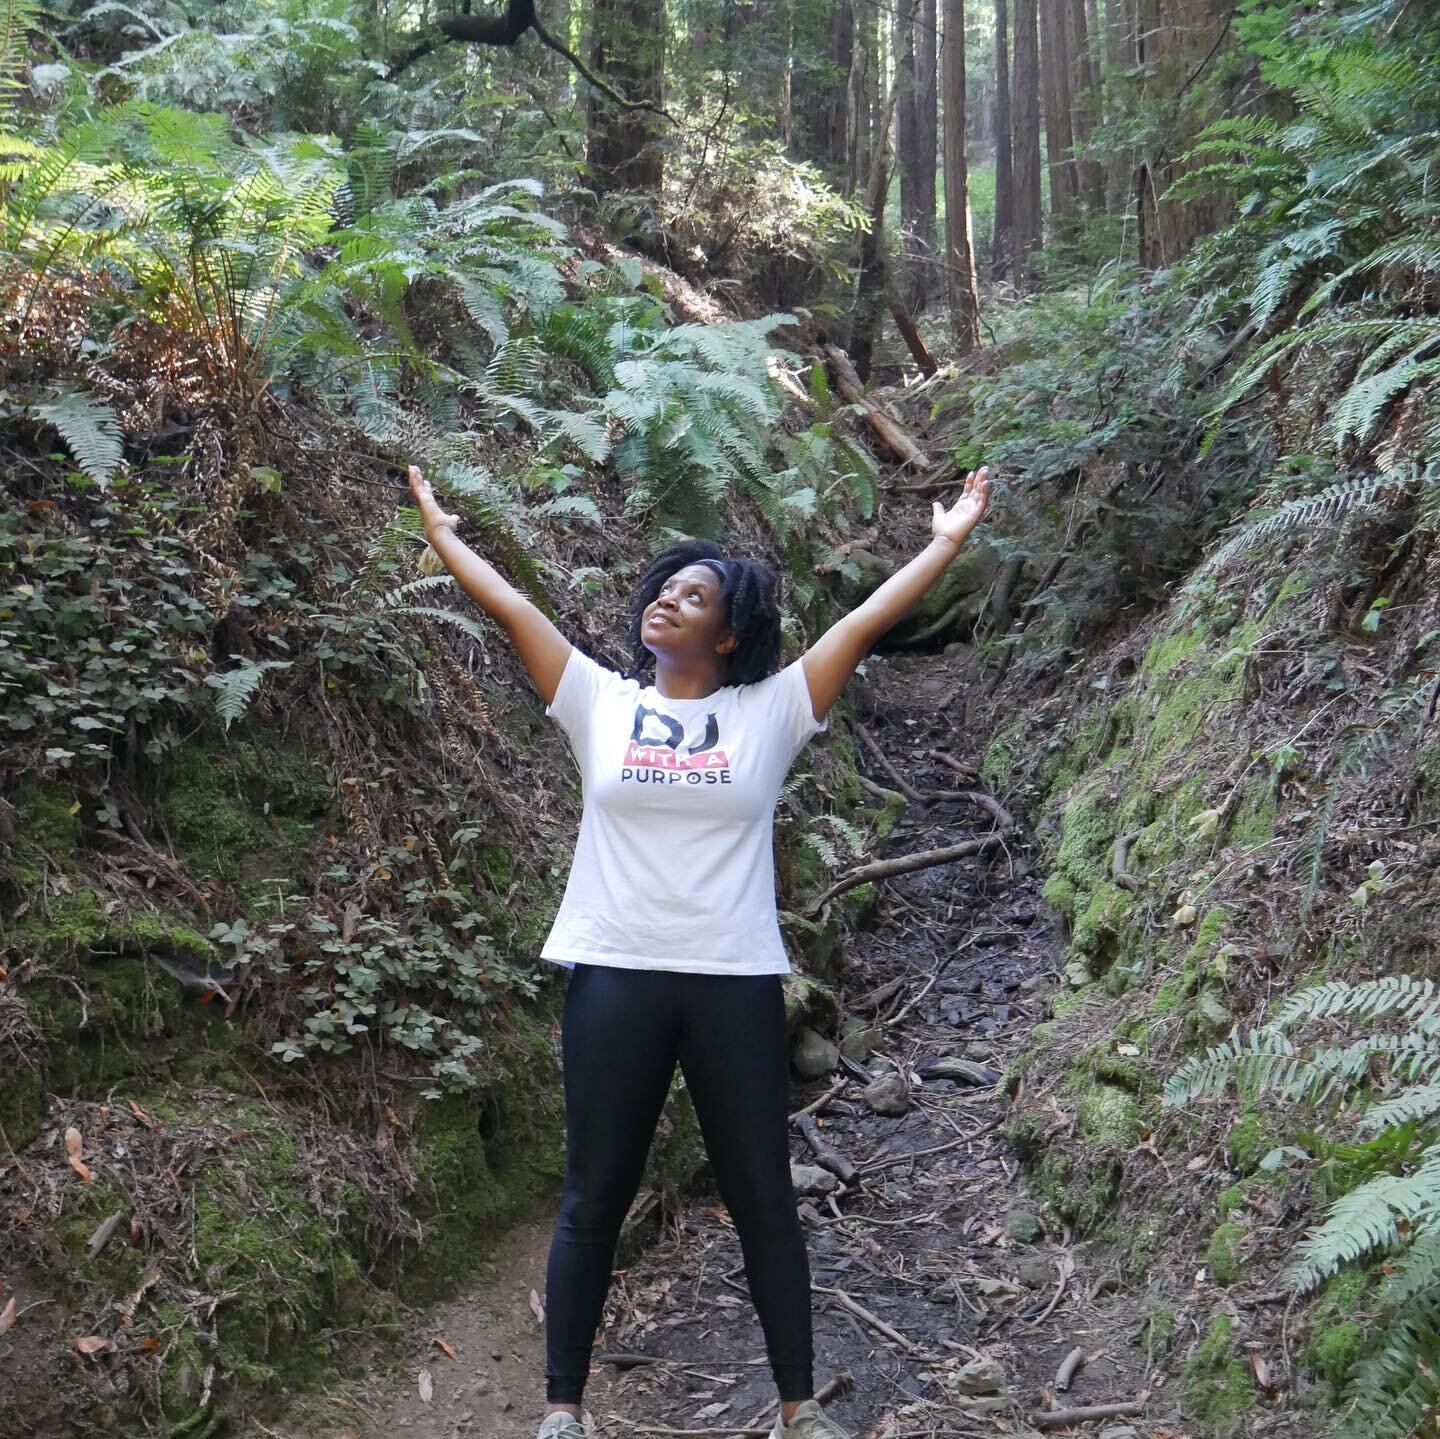 Much needed tranquil time in The Muir Woods.
#livingthroughapandemic #muirwoods #california #djwithapurpose #djlife #hiking #blm